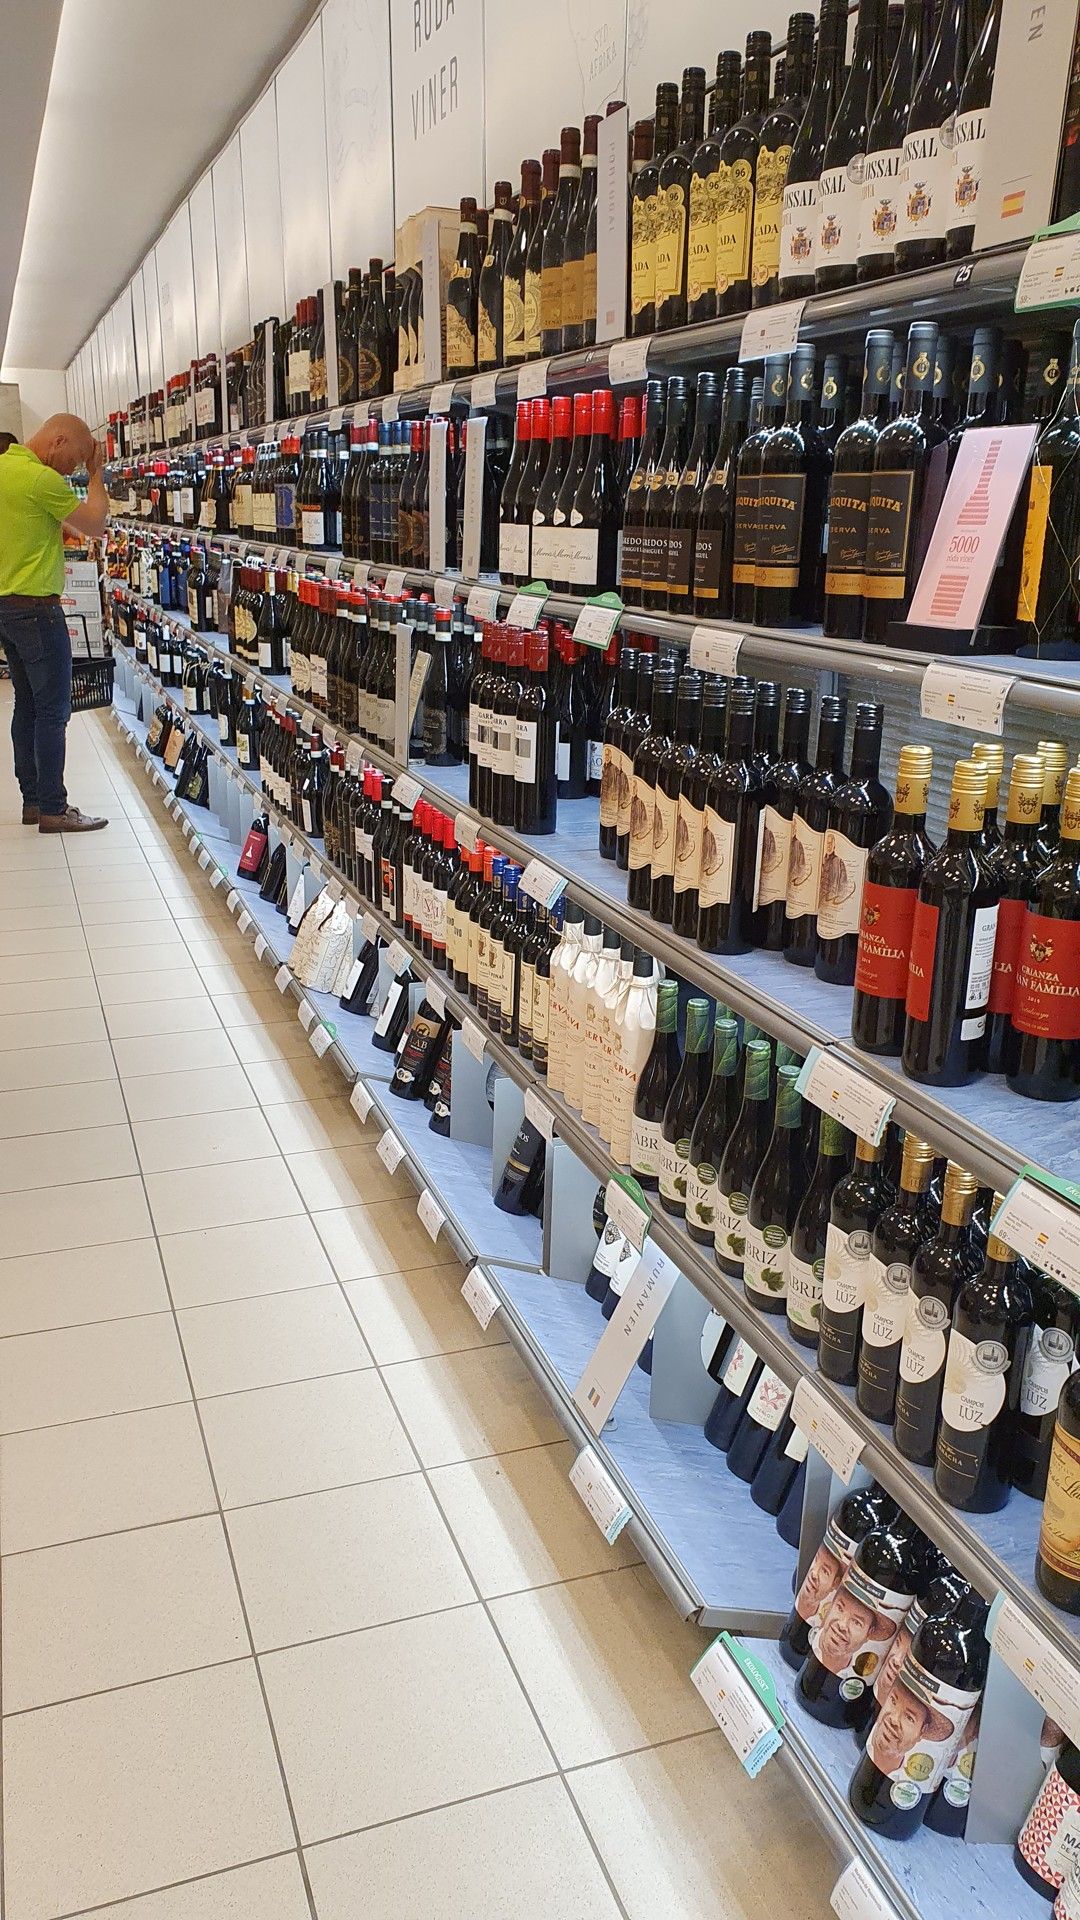 Systembolaget,社交距离,midsommar,瑞典